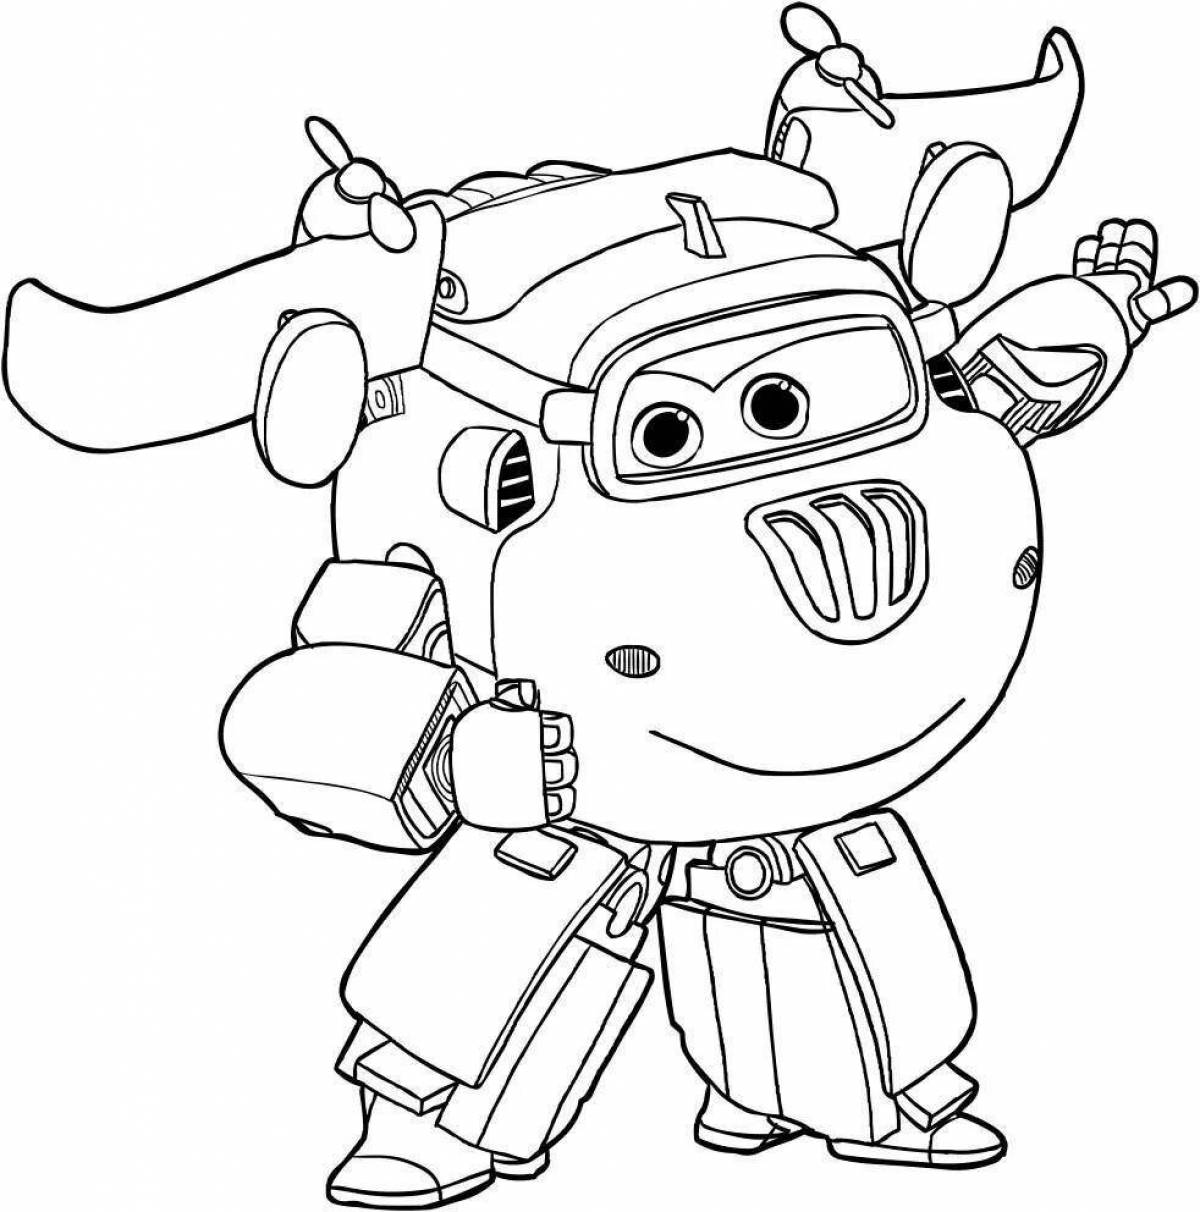 Coloring page for superwings and his friends